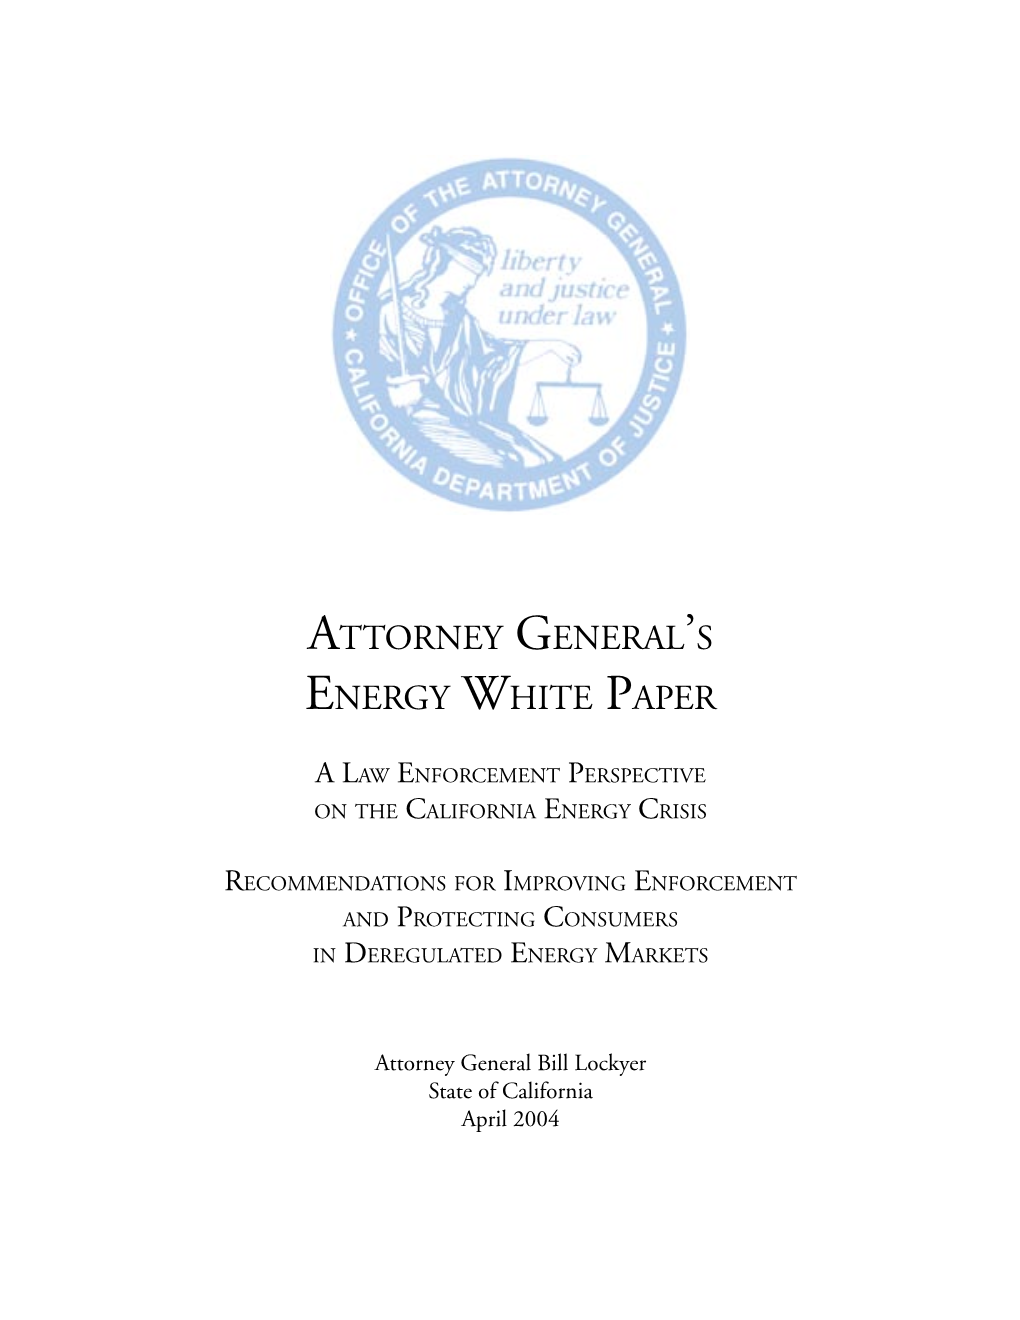 Attorney General's Energy White Paper